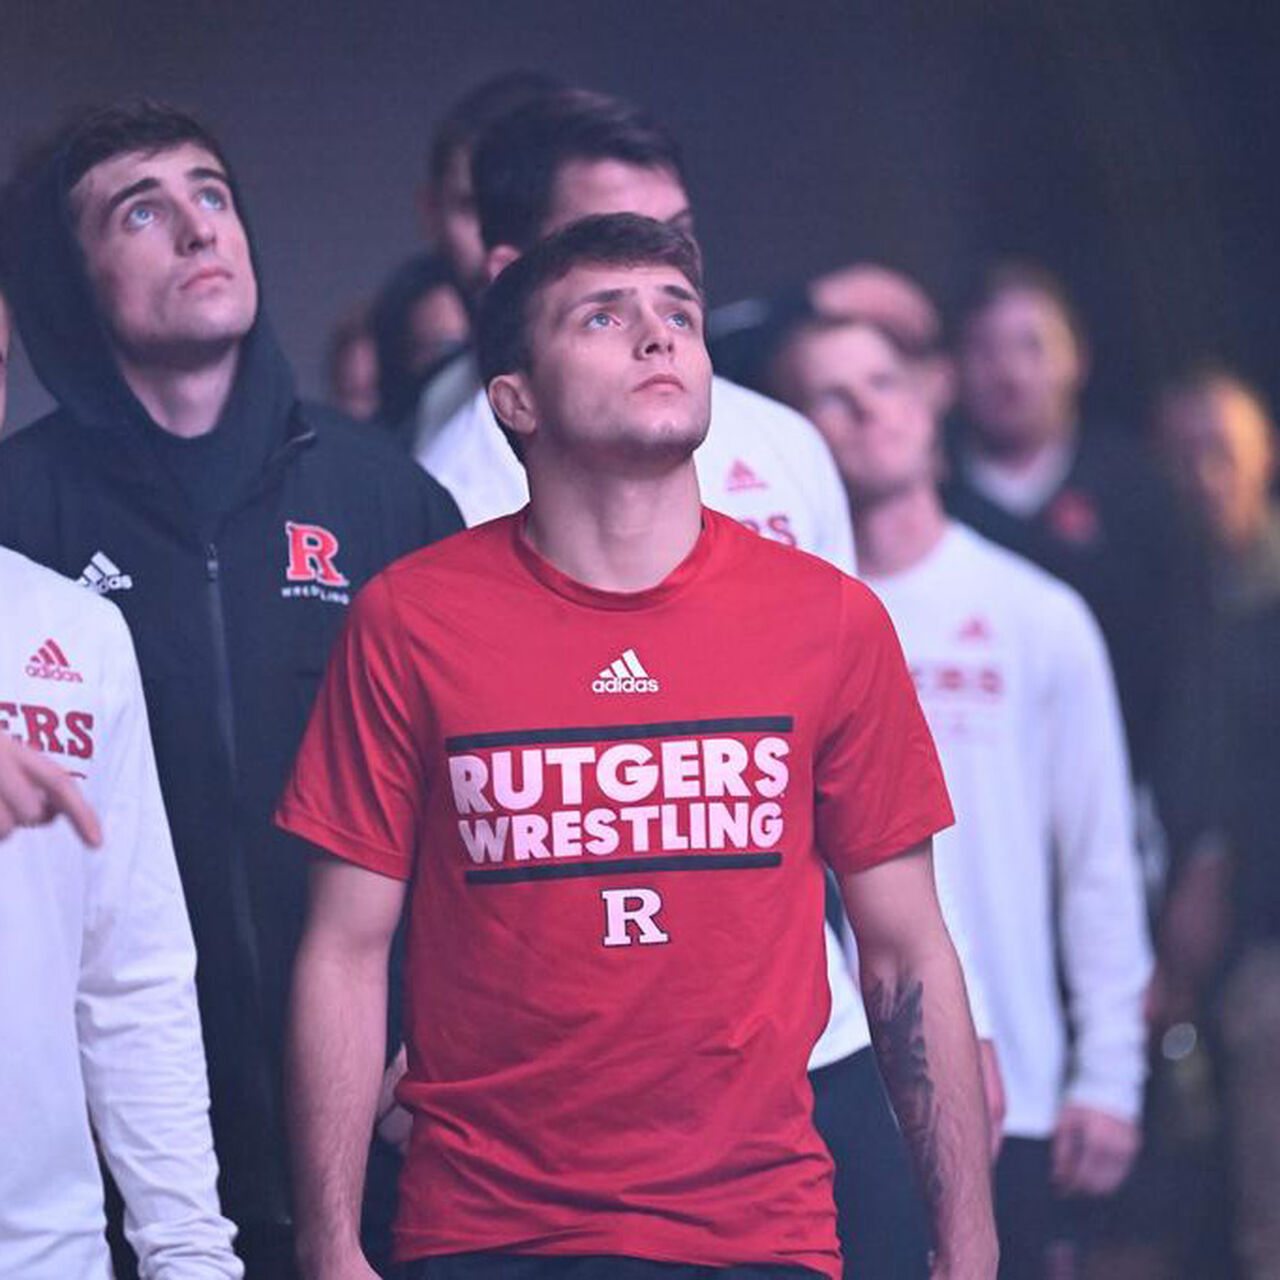 Rutgers Wrestling team members walking into a match image number 0